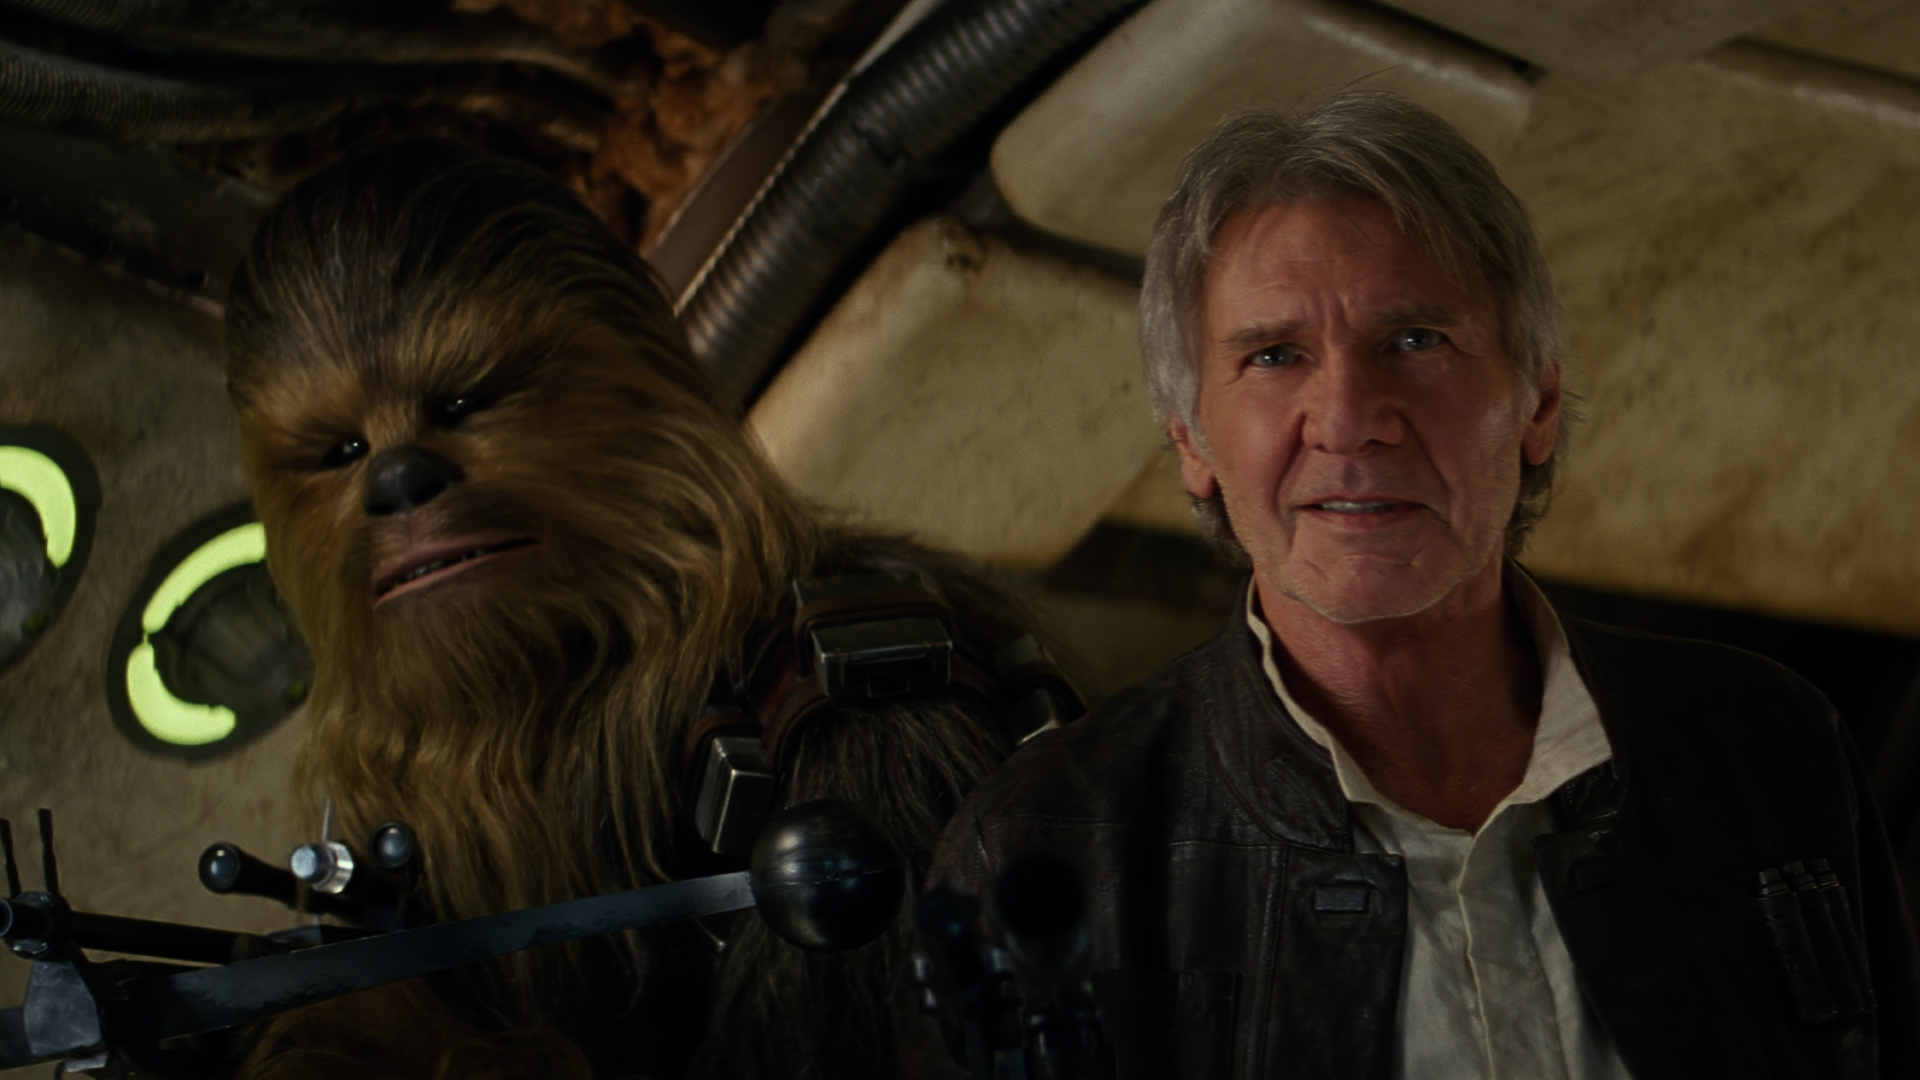 Harrison Ford: Chewie, we're home!, Han Solo, The Force Awakens, Star Wars. 1920x1080 Full HD Wallpaper.